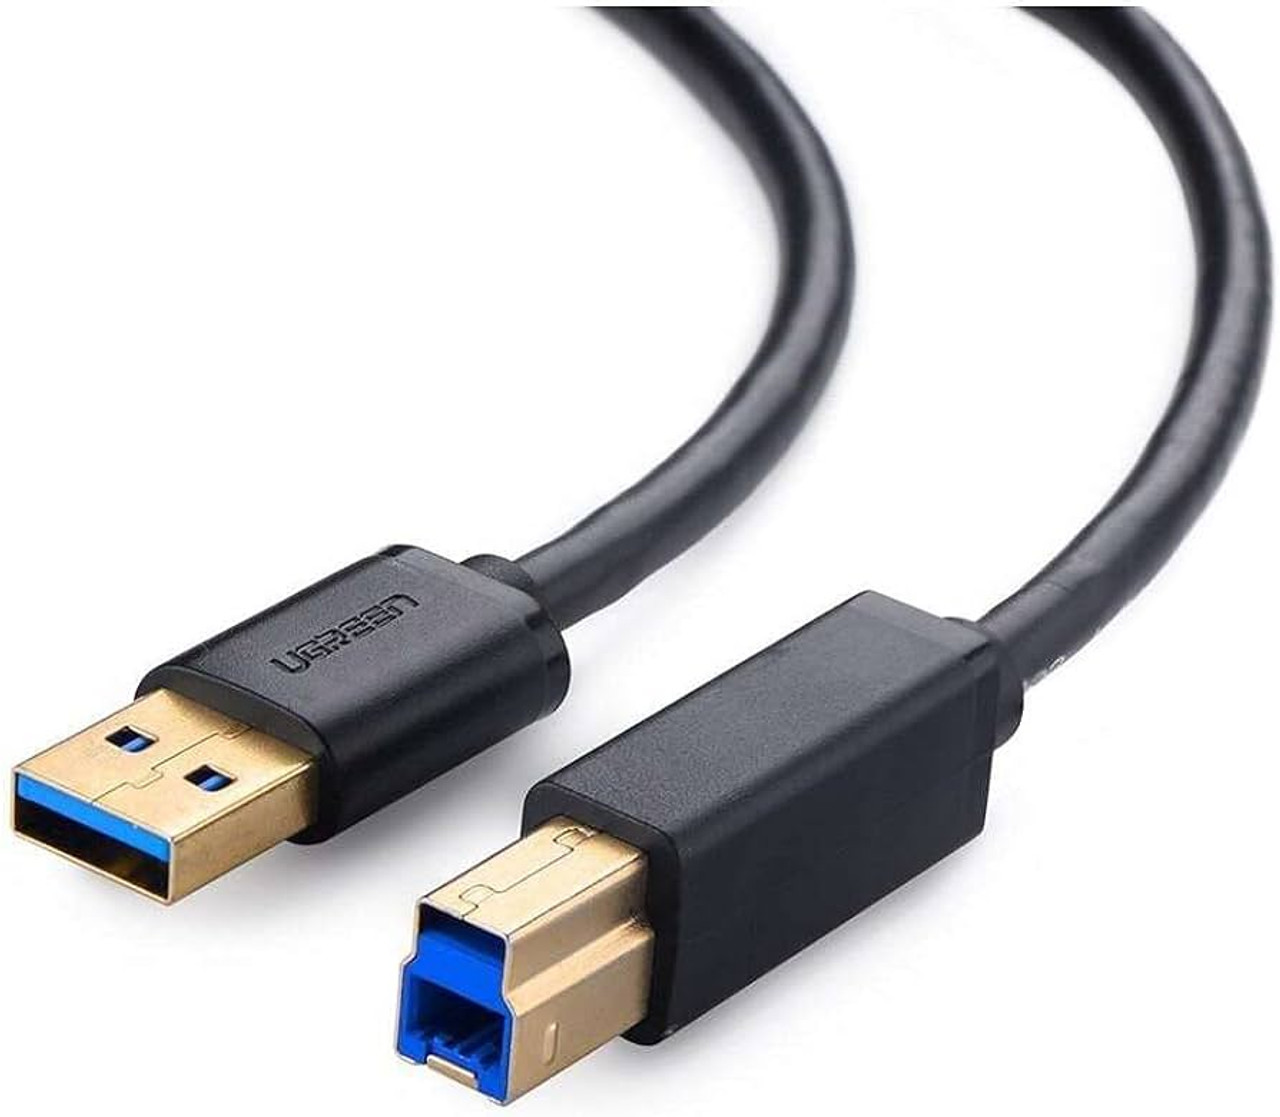 UGREEN USB to USB, 5 Gbps USB 3.0 Cable, Nylon Durable Male to Male Cable,  Compatible with Hard Drive, Cooling Fan/pad, Camera, DVD Player, TV, Flash